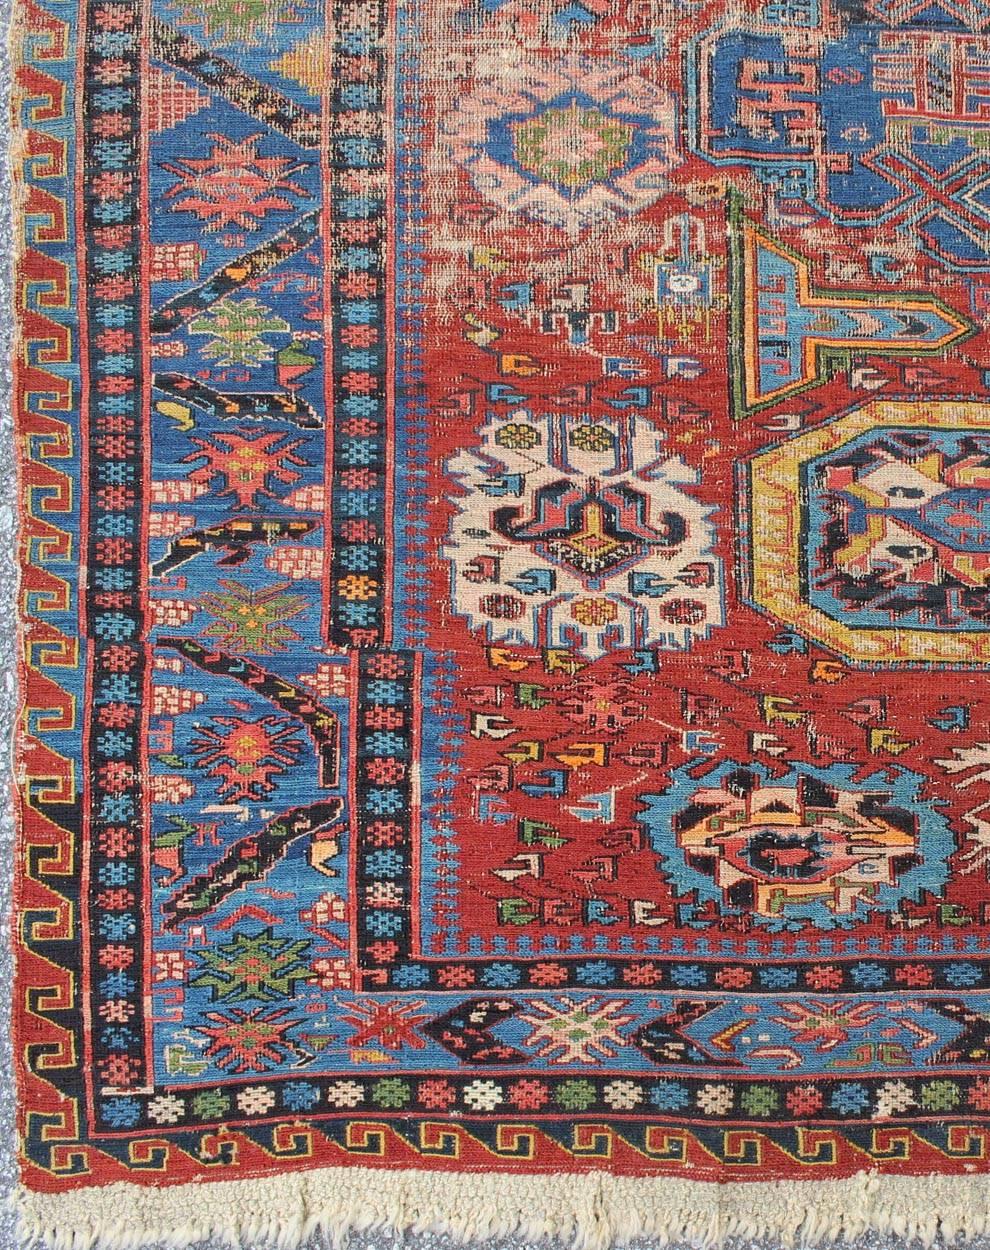 This magnificent antique Caucasian Sumac rug from the late 19th century Caucuses features an all-over pattern
that lends itself well to the detailed weft-wrapped weaving technique known as Sumac. All-over medallions, motifs and radiant appendages